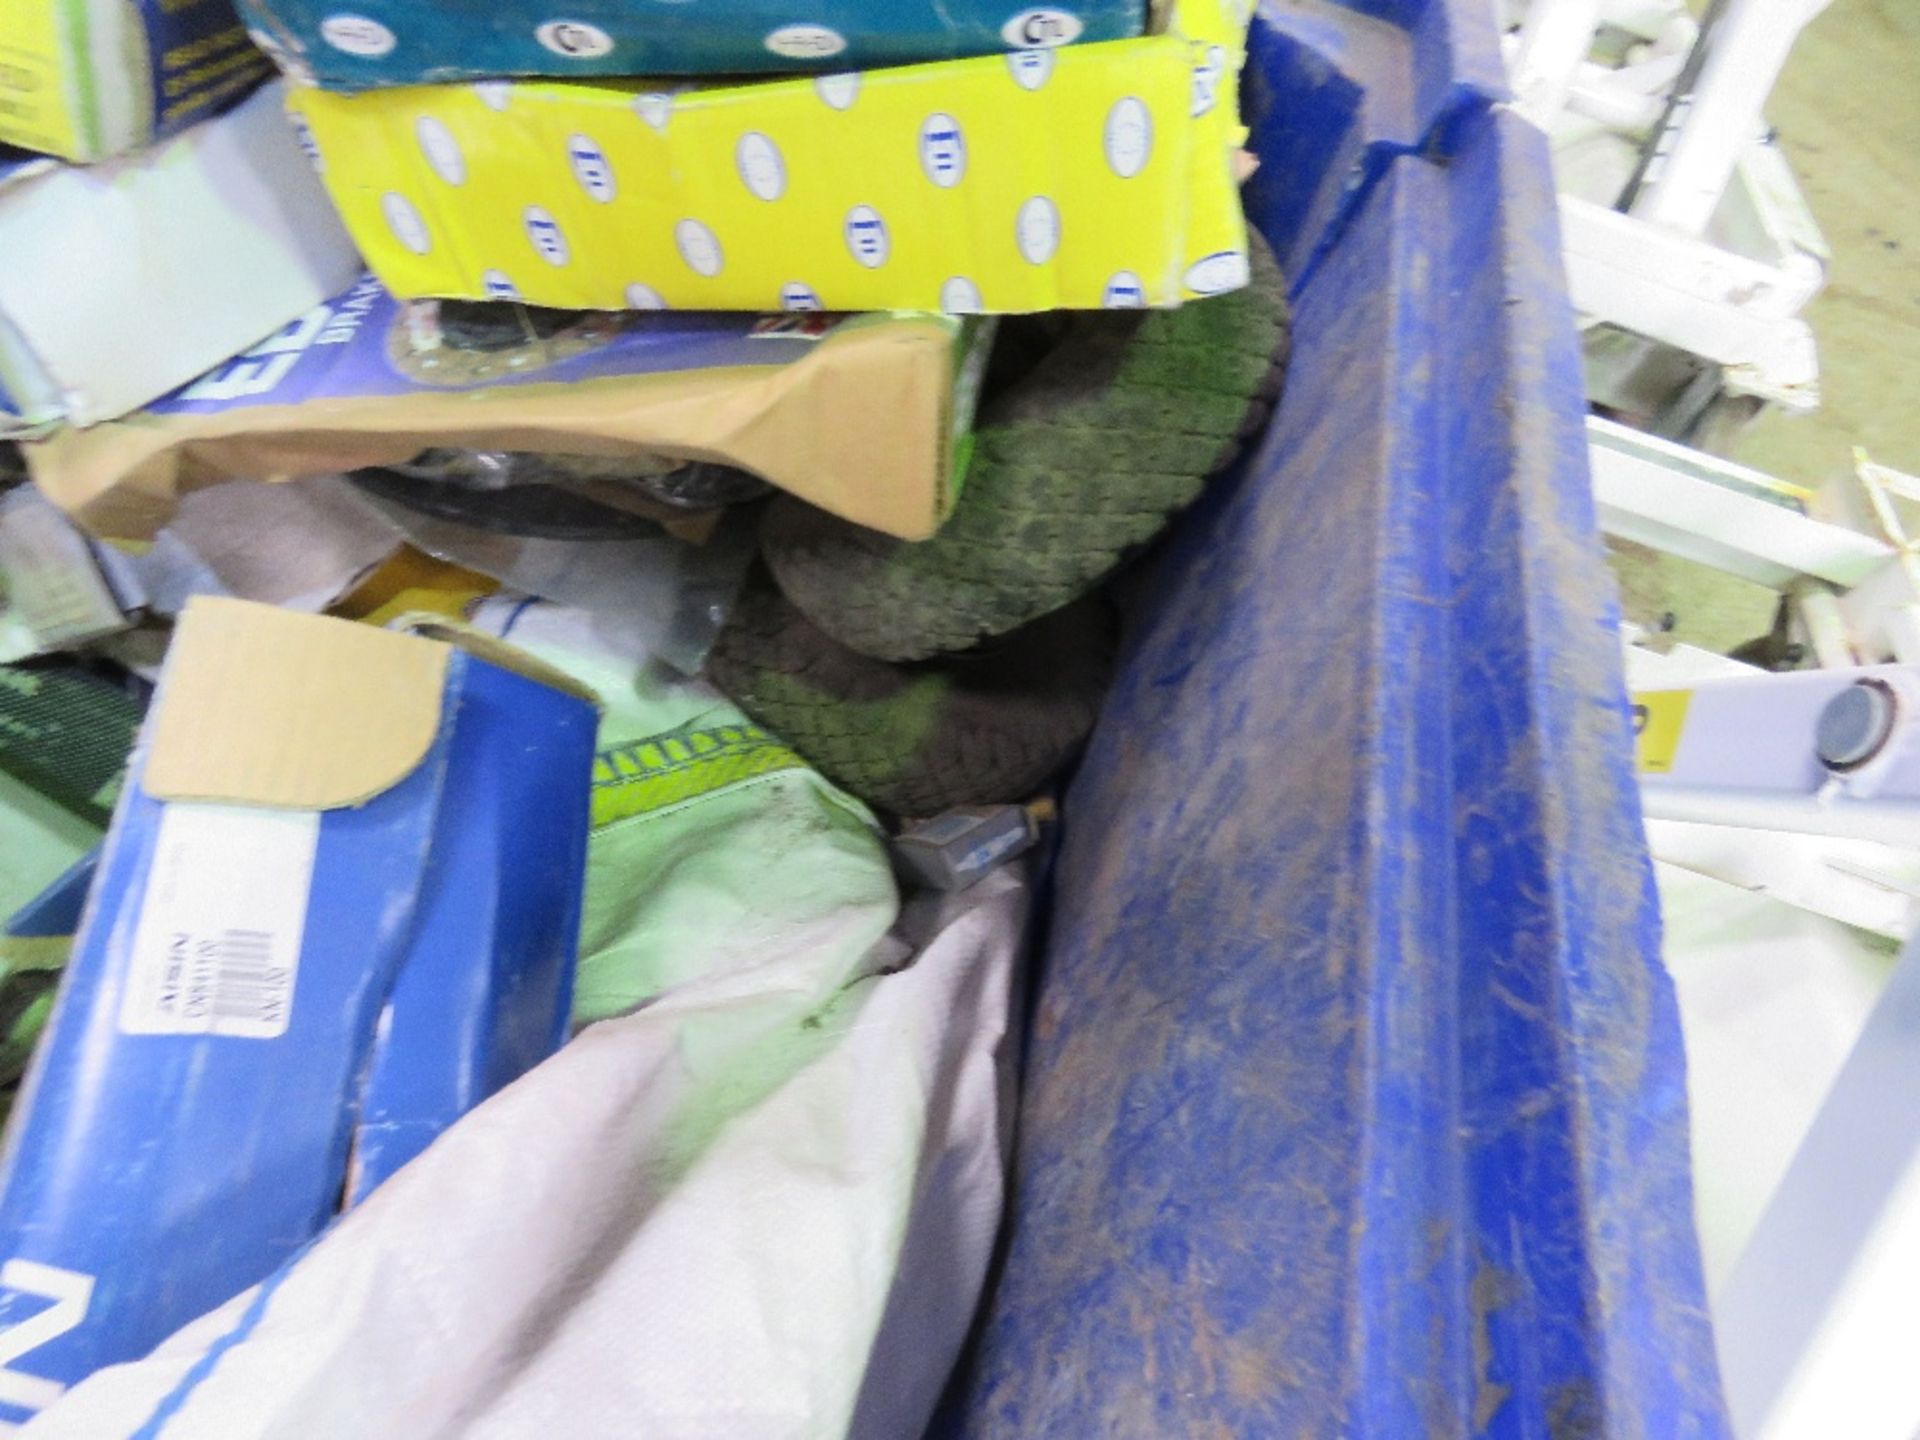 STILLAGE OF COMMERCIAL VEHICLE CLEARANCE ITEMS. - Image 6 of 6